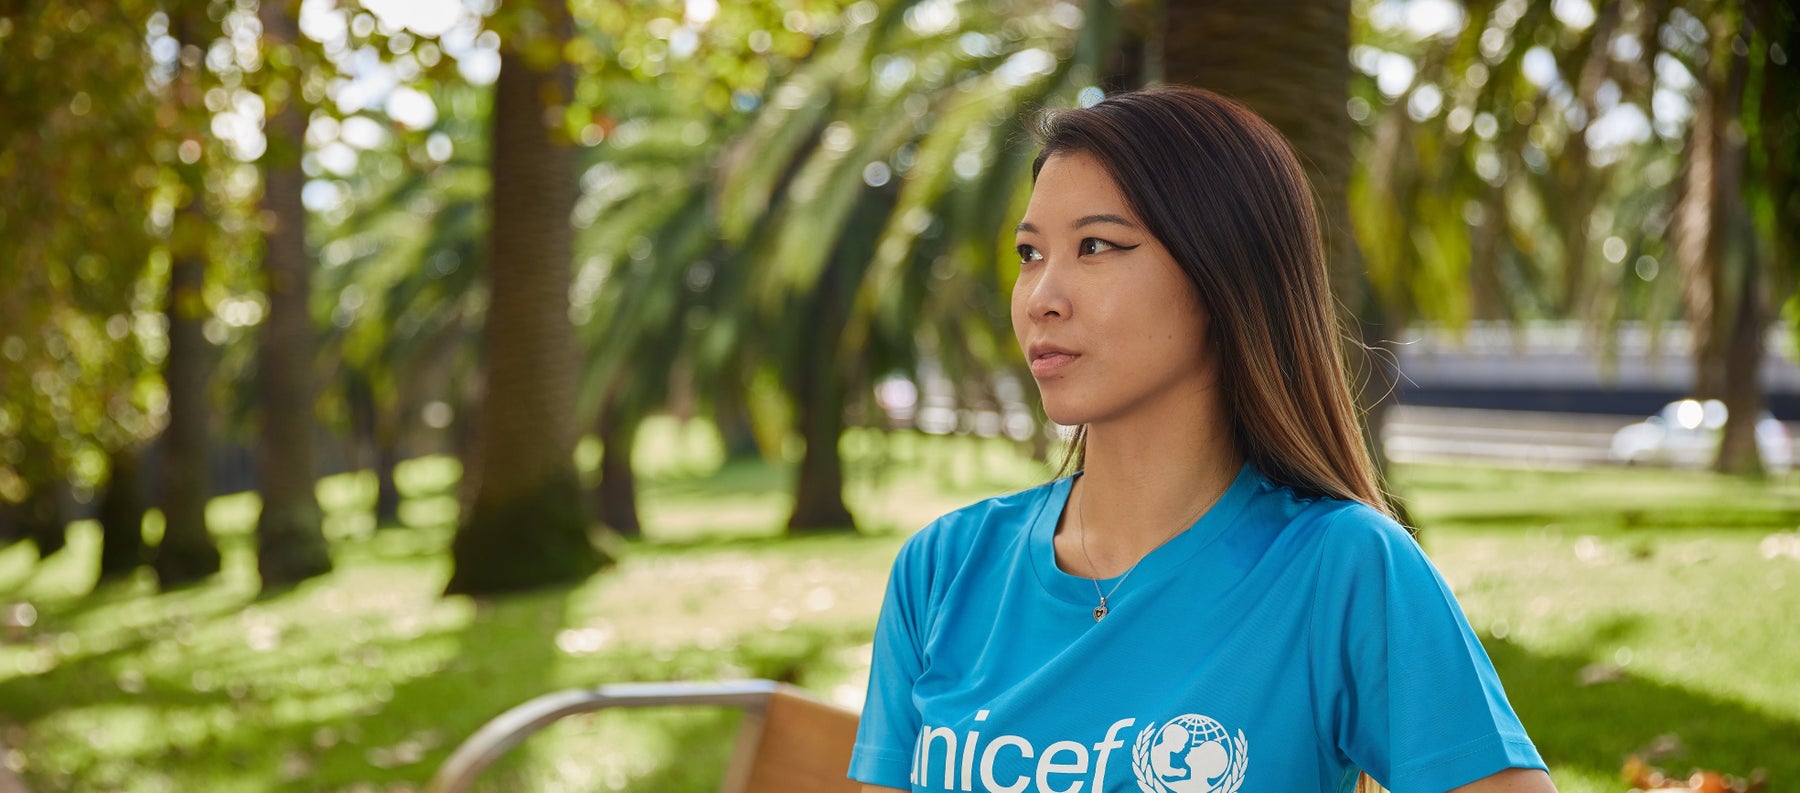 Image of Emily Unity, a young person wearing a UNICEF t-shirt